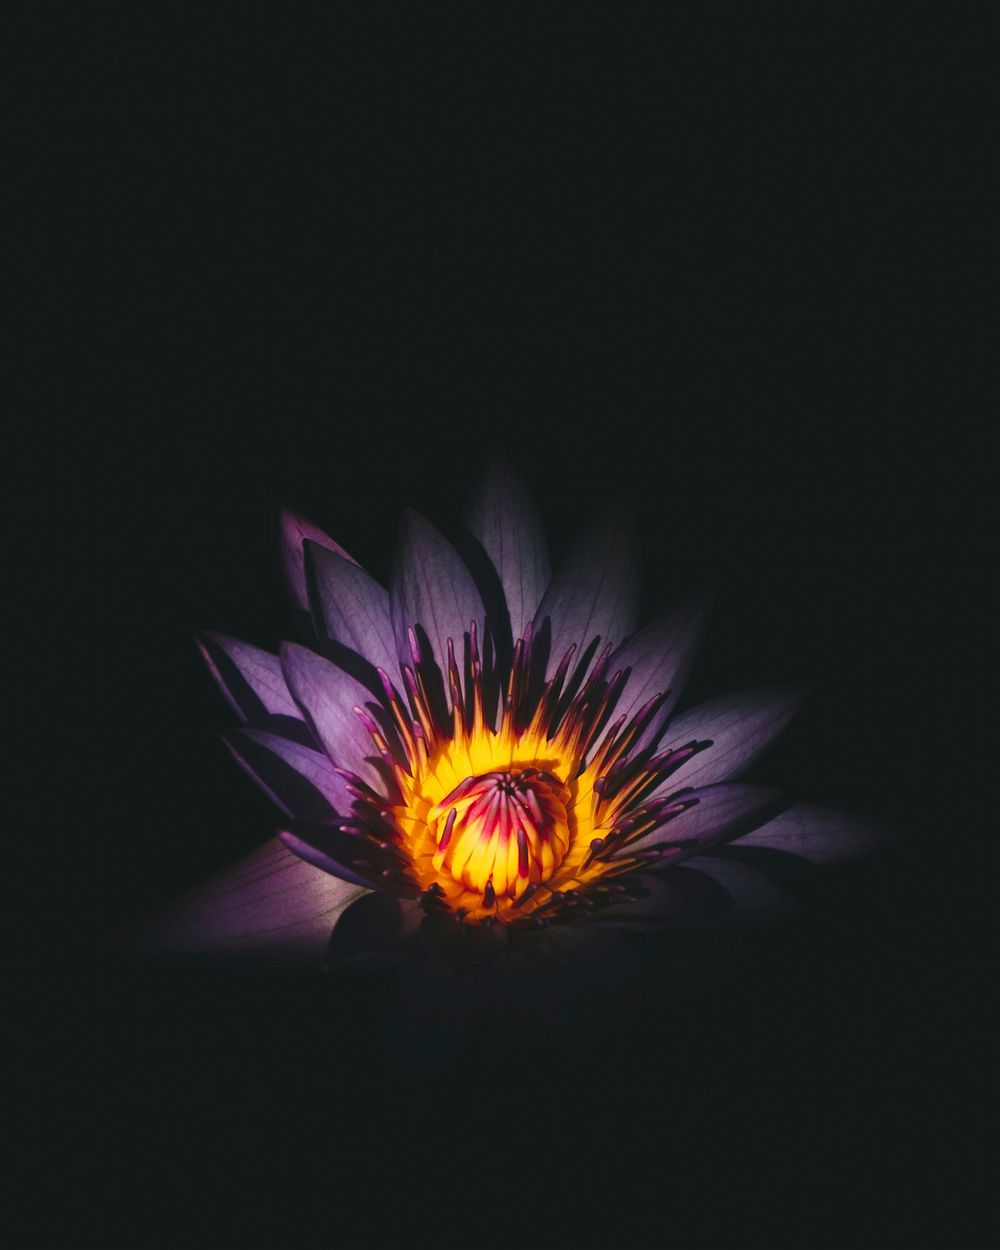 A close-up of a dark purple flower with a yellow center against a black background. Original public domain image from…